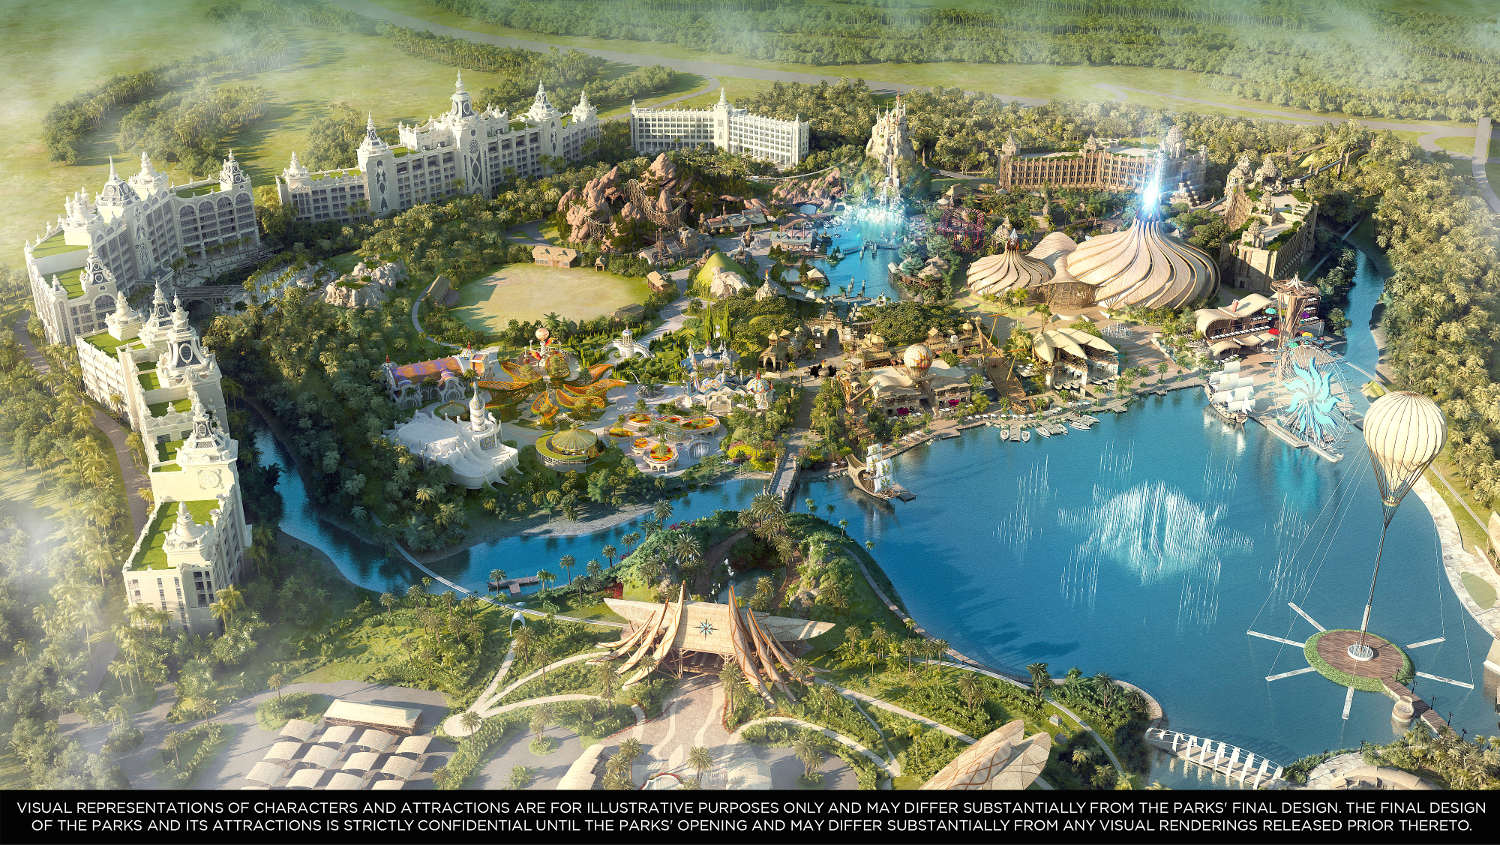 News From Vidanta - New renderings of parts of the Park.  There are changes, as we knew there would be.  Interesting perspectives too.  Stay tuned .....Subscribers View - 4/16/19